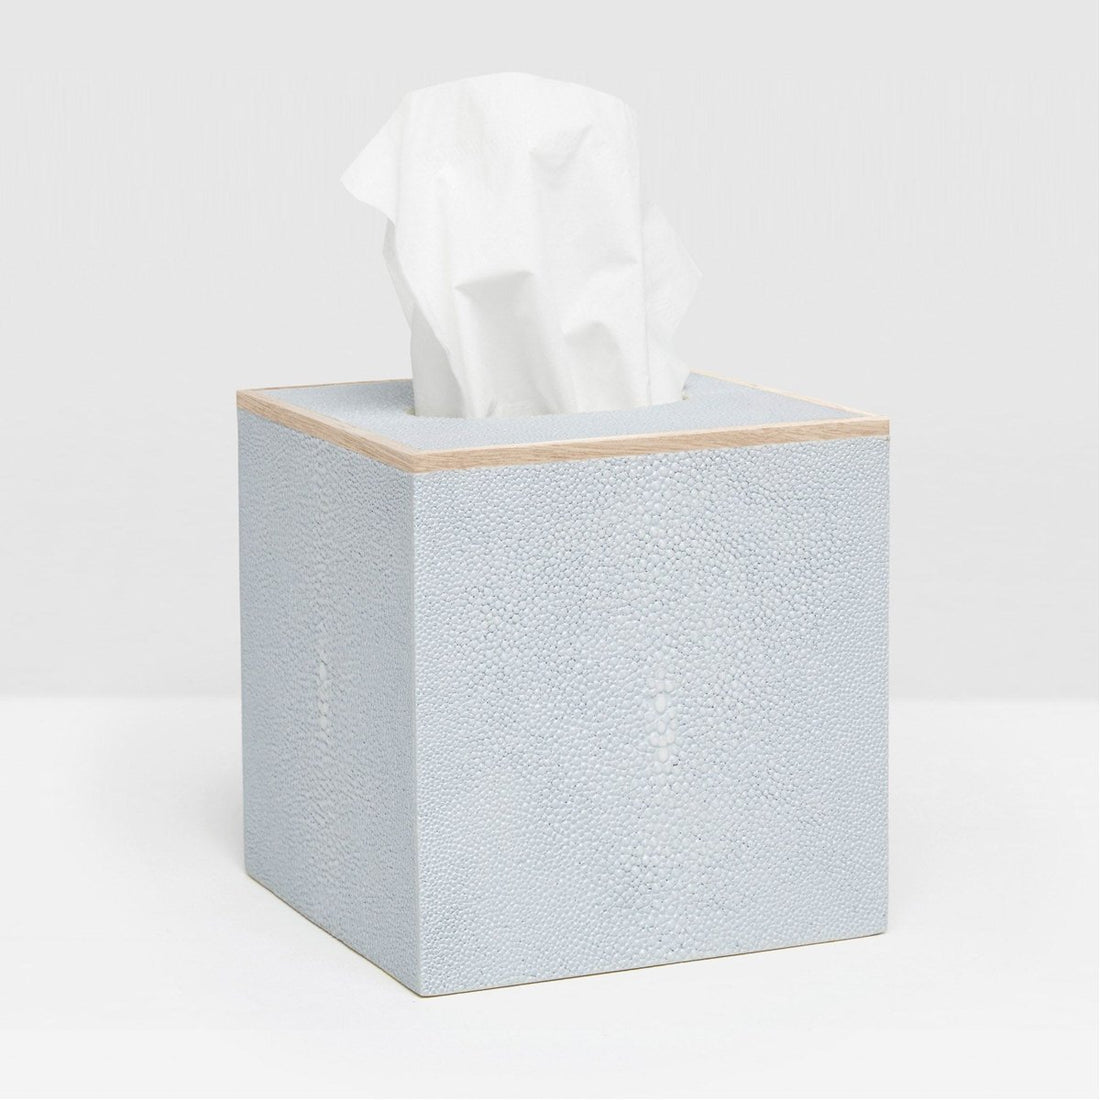 Pigeon and Poodle Manchester Tissue Box, Square